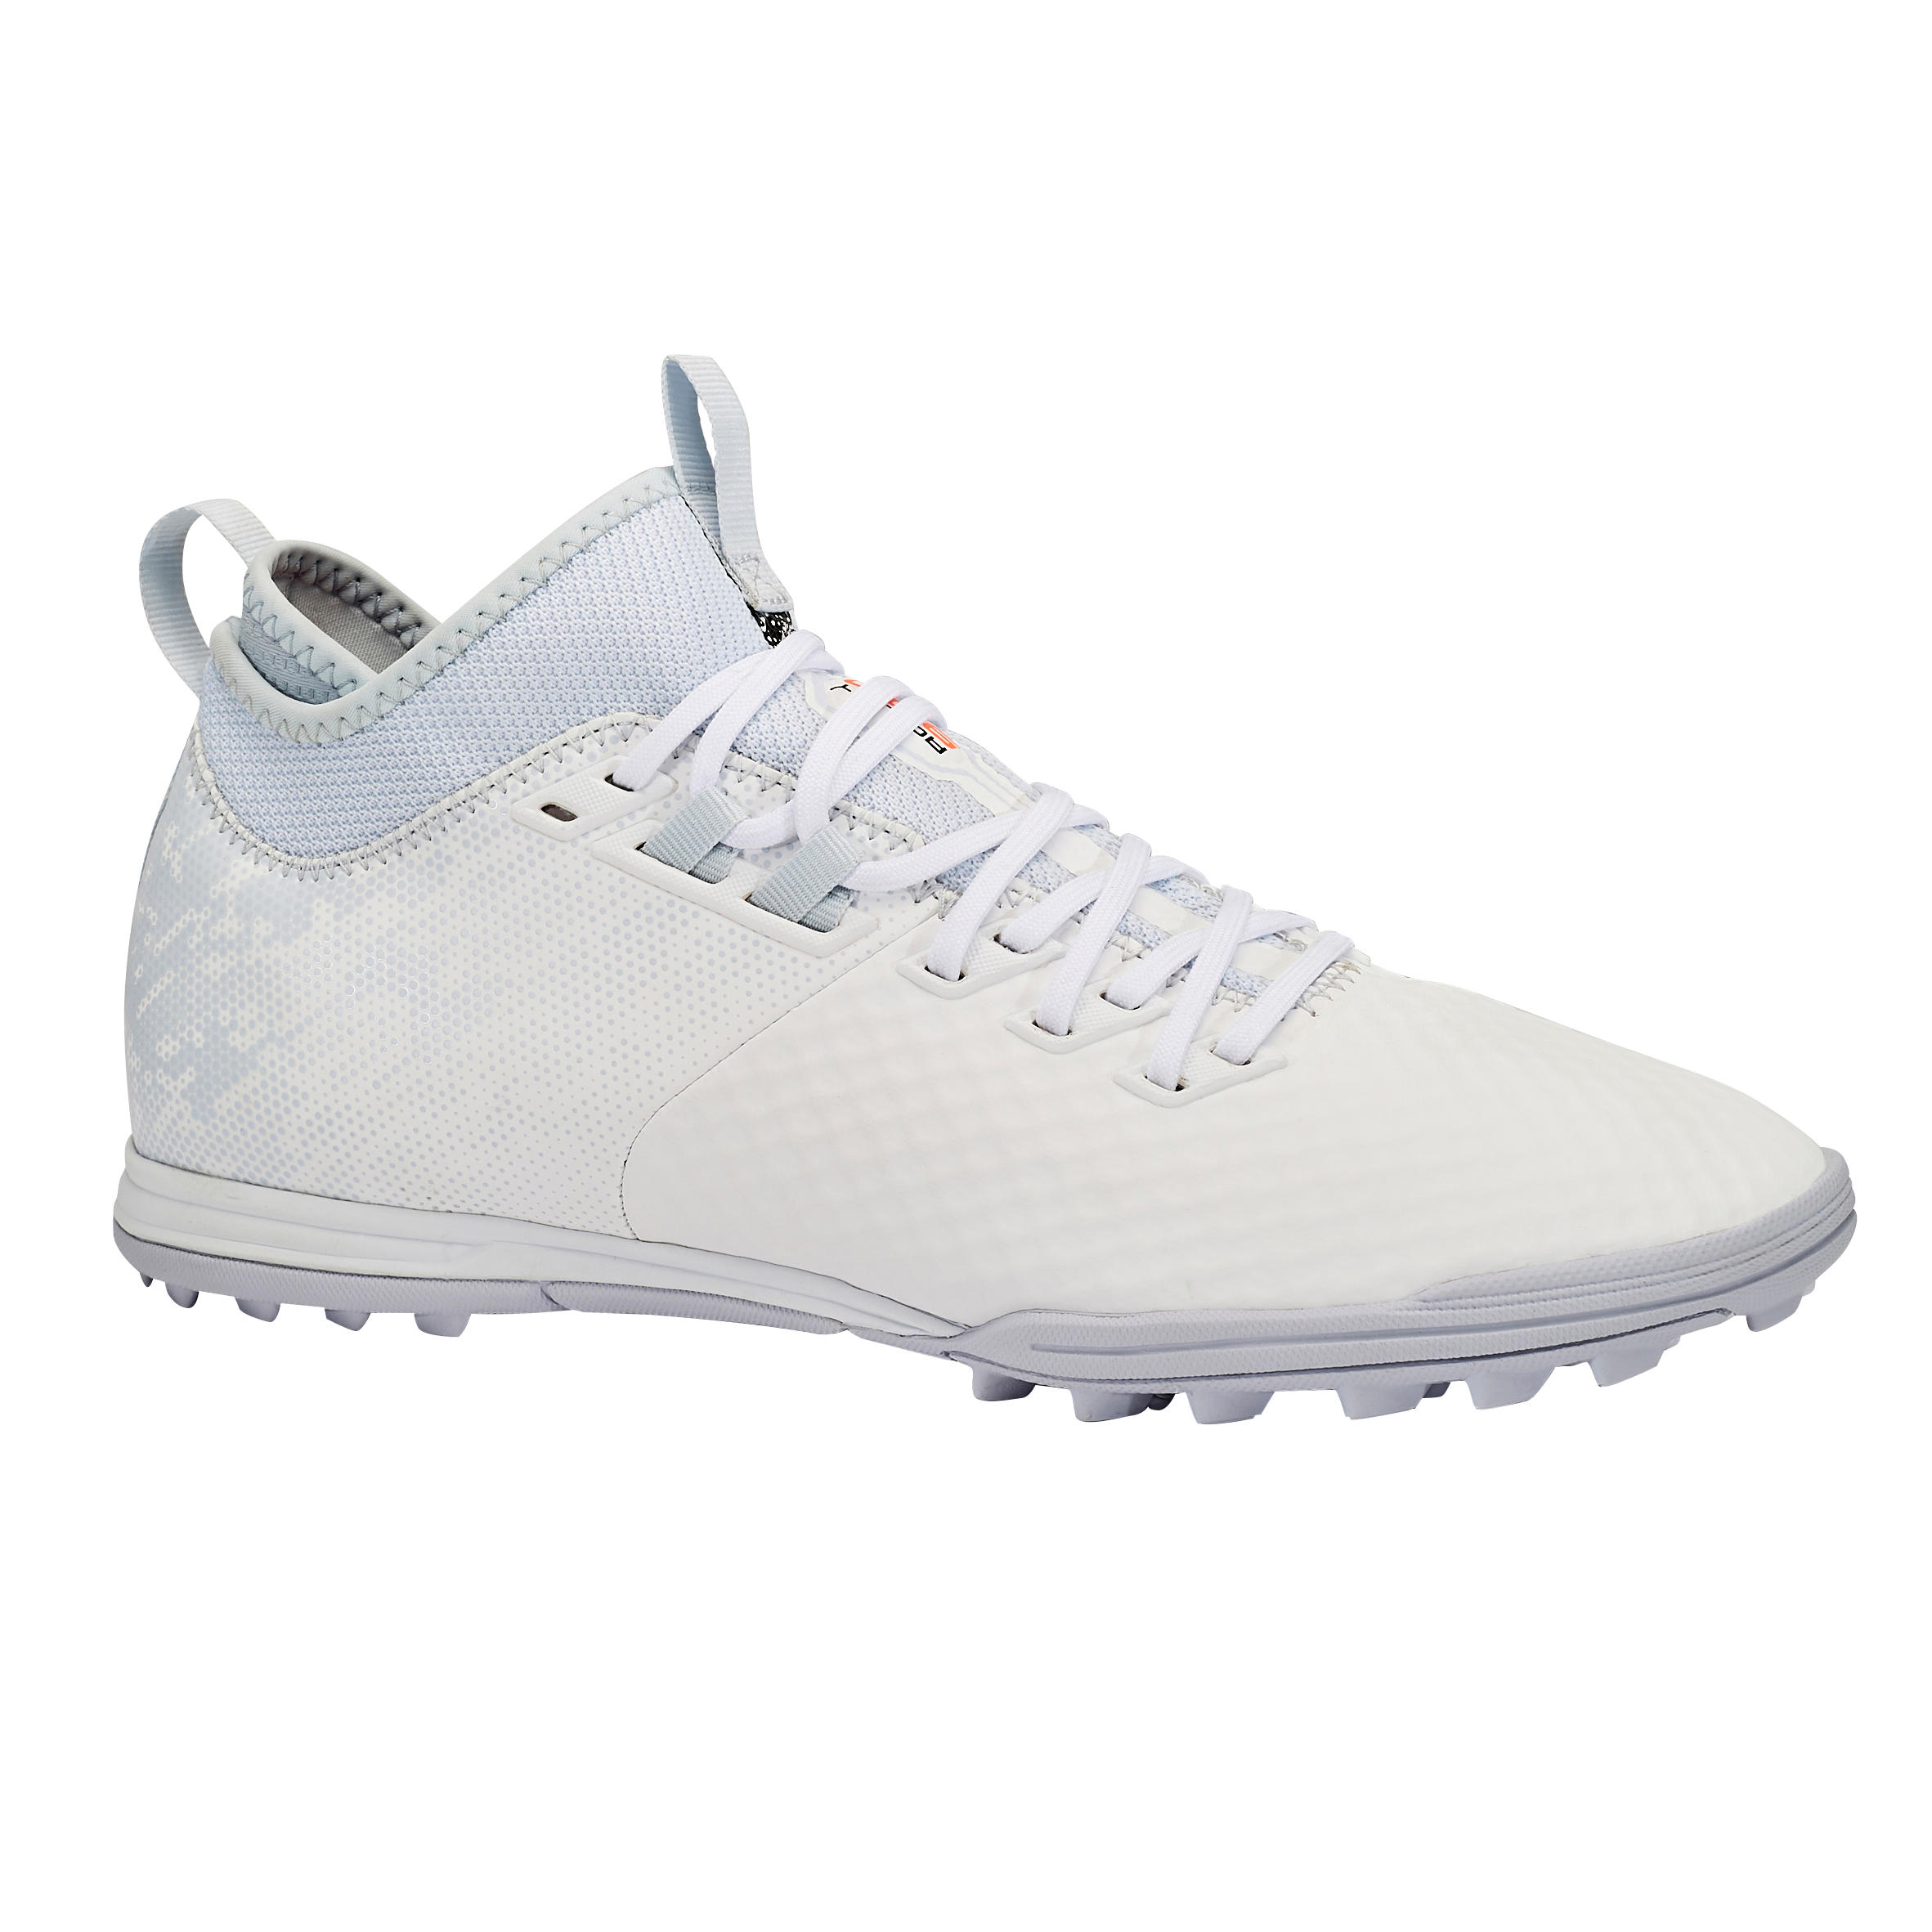 womens astro turf trainers